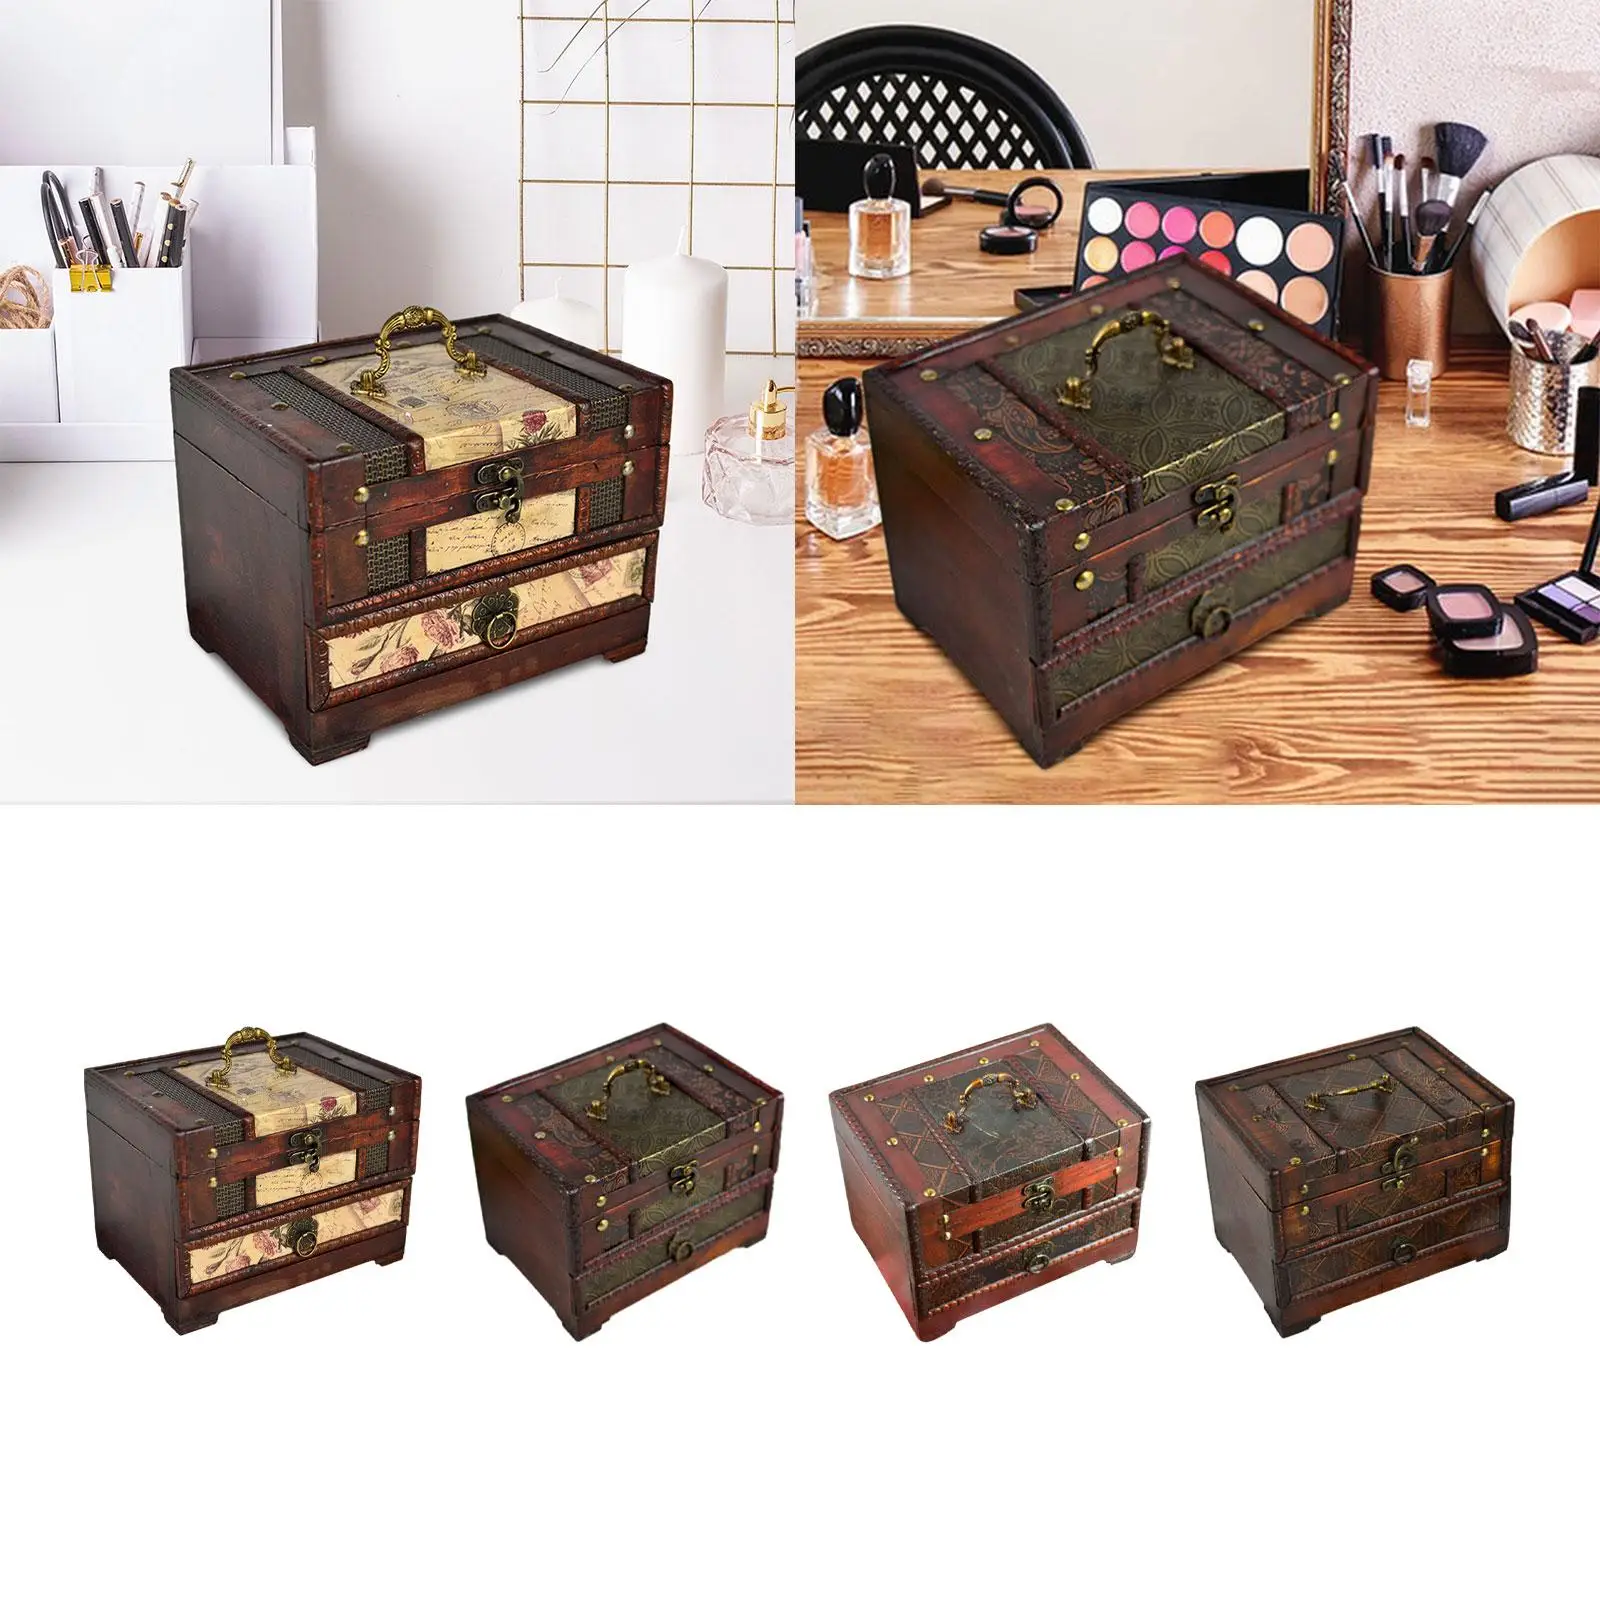 Wooden Jewelry Box, Decorative Storage Box, Mom Gifts, Multi Compartments Rectangle Container Antique Jewelry Case Holder